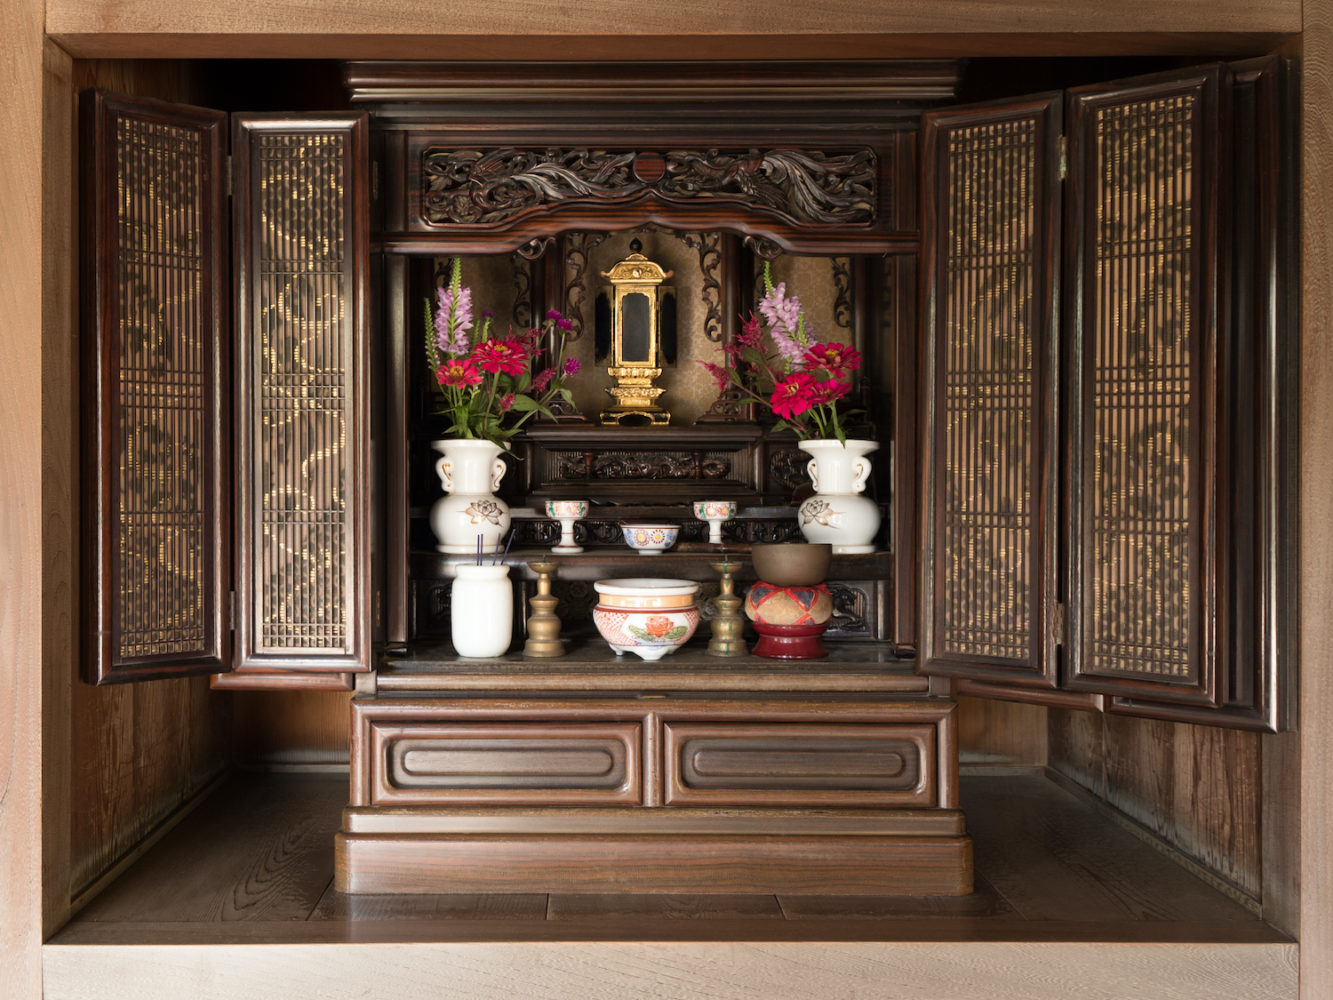 Buddhist altar of Japanese old houses